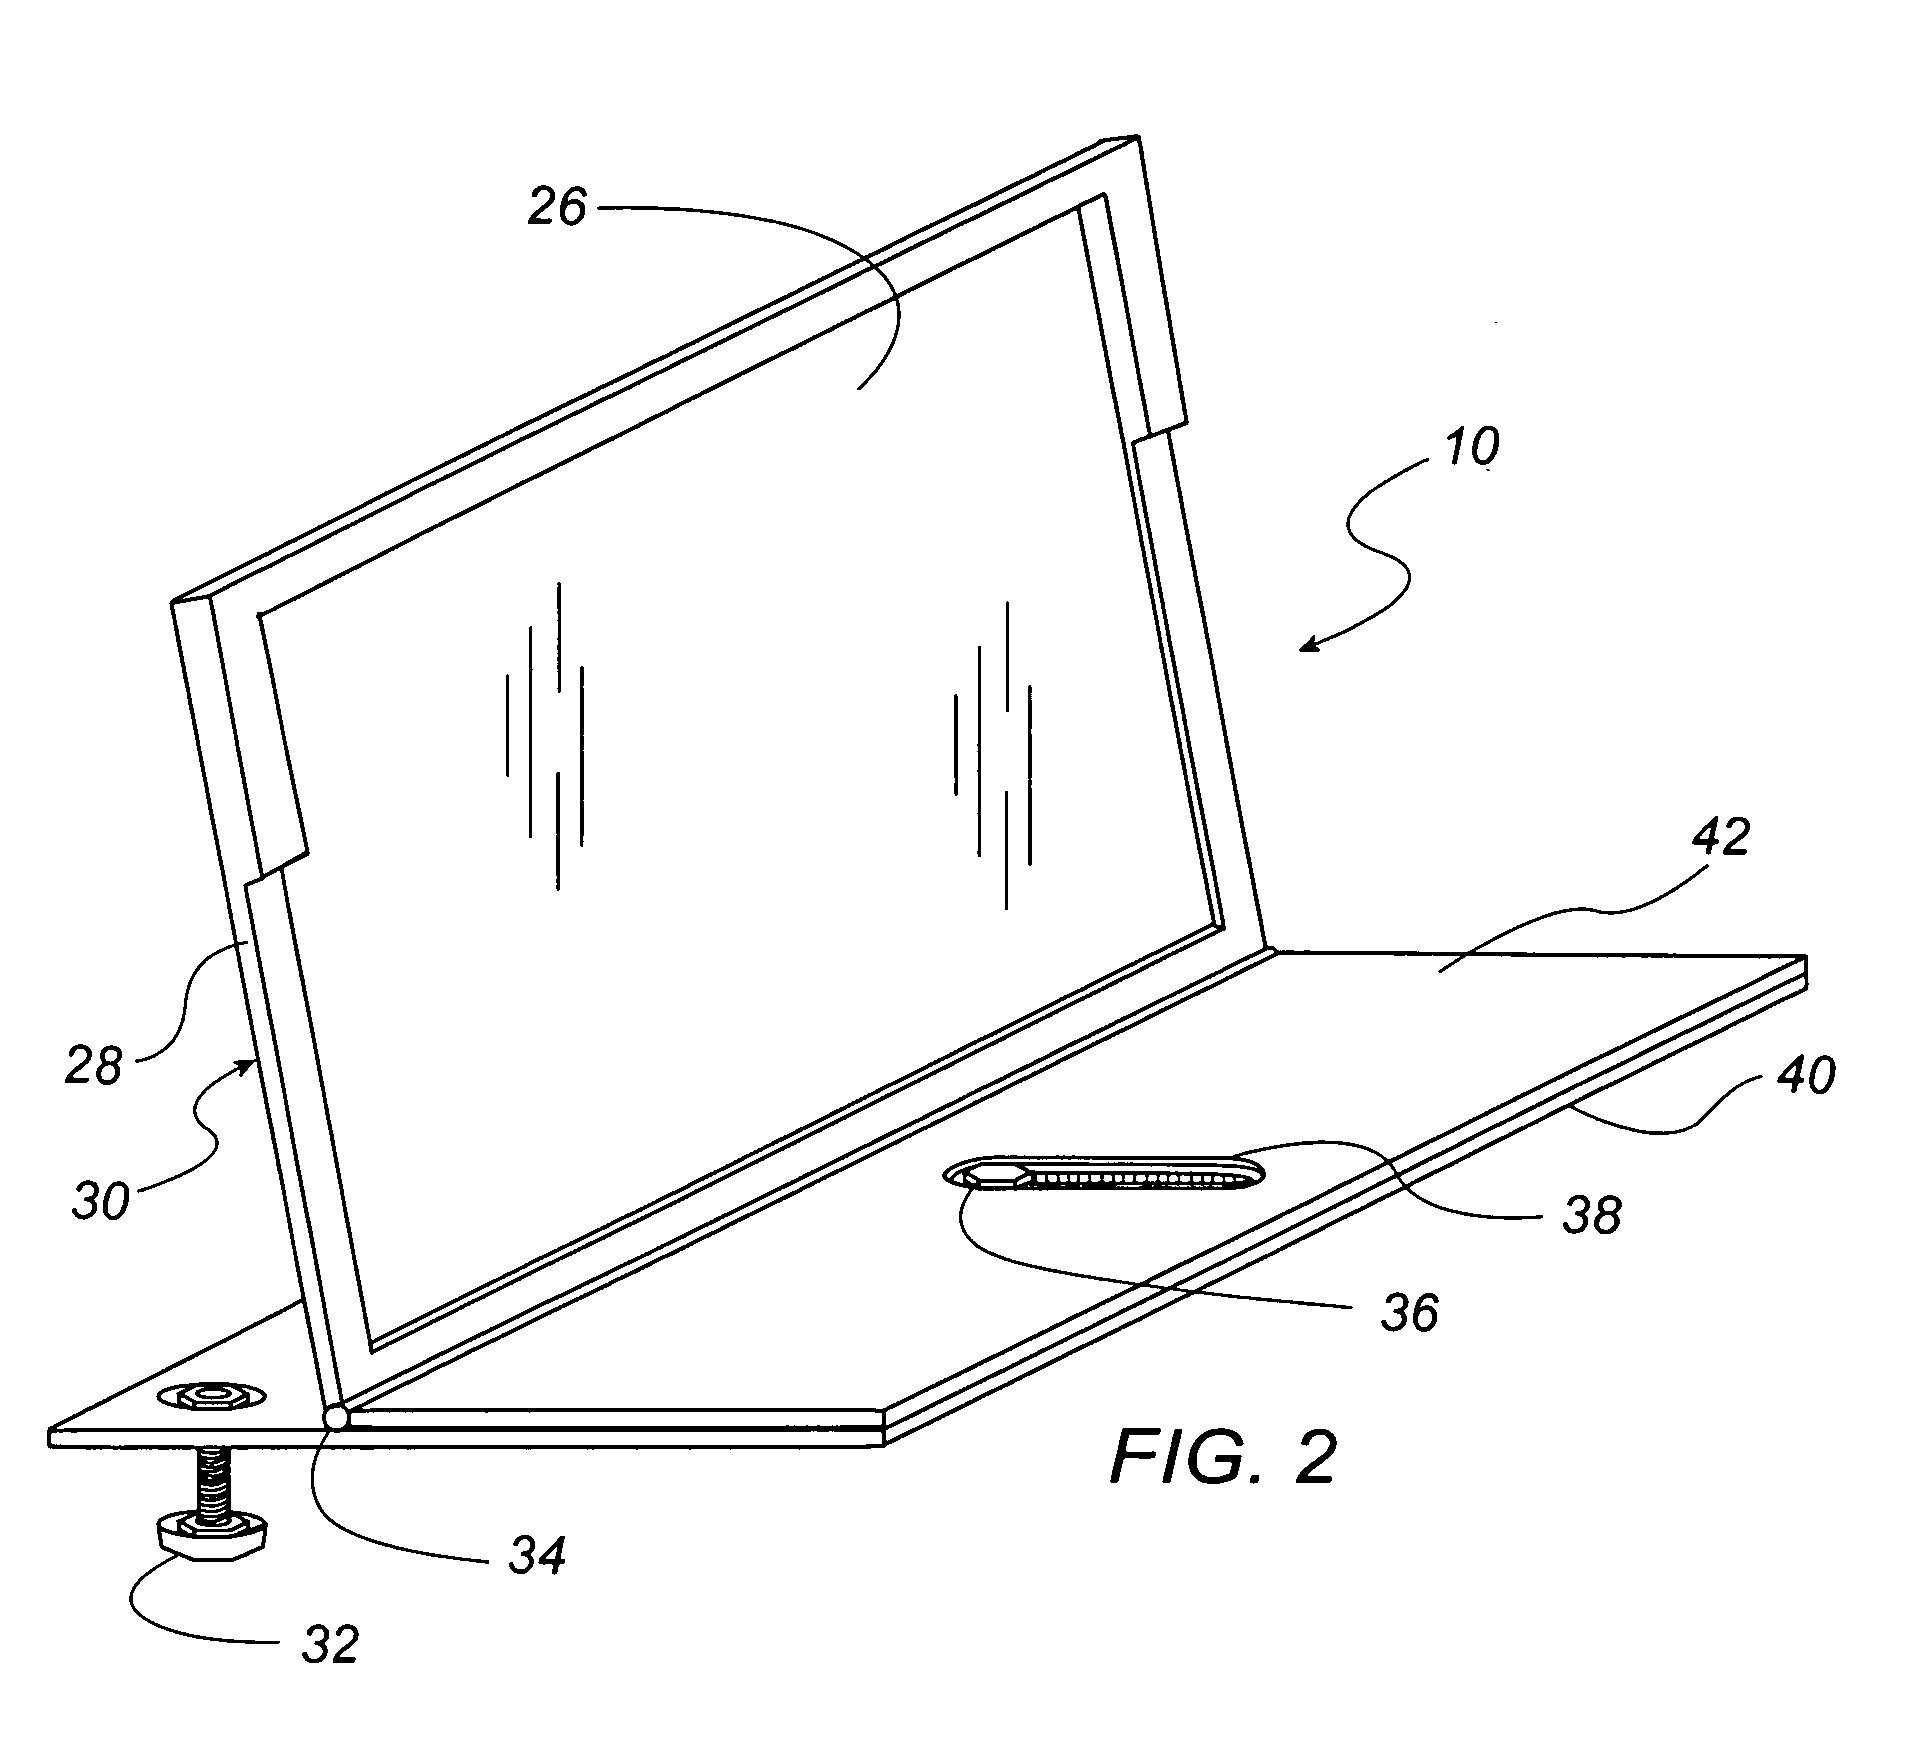 Portable wide-view mirror for blind-side backing of a semi-tractor trailer